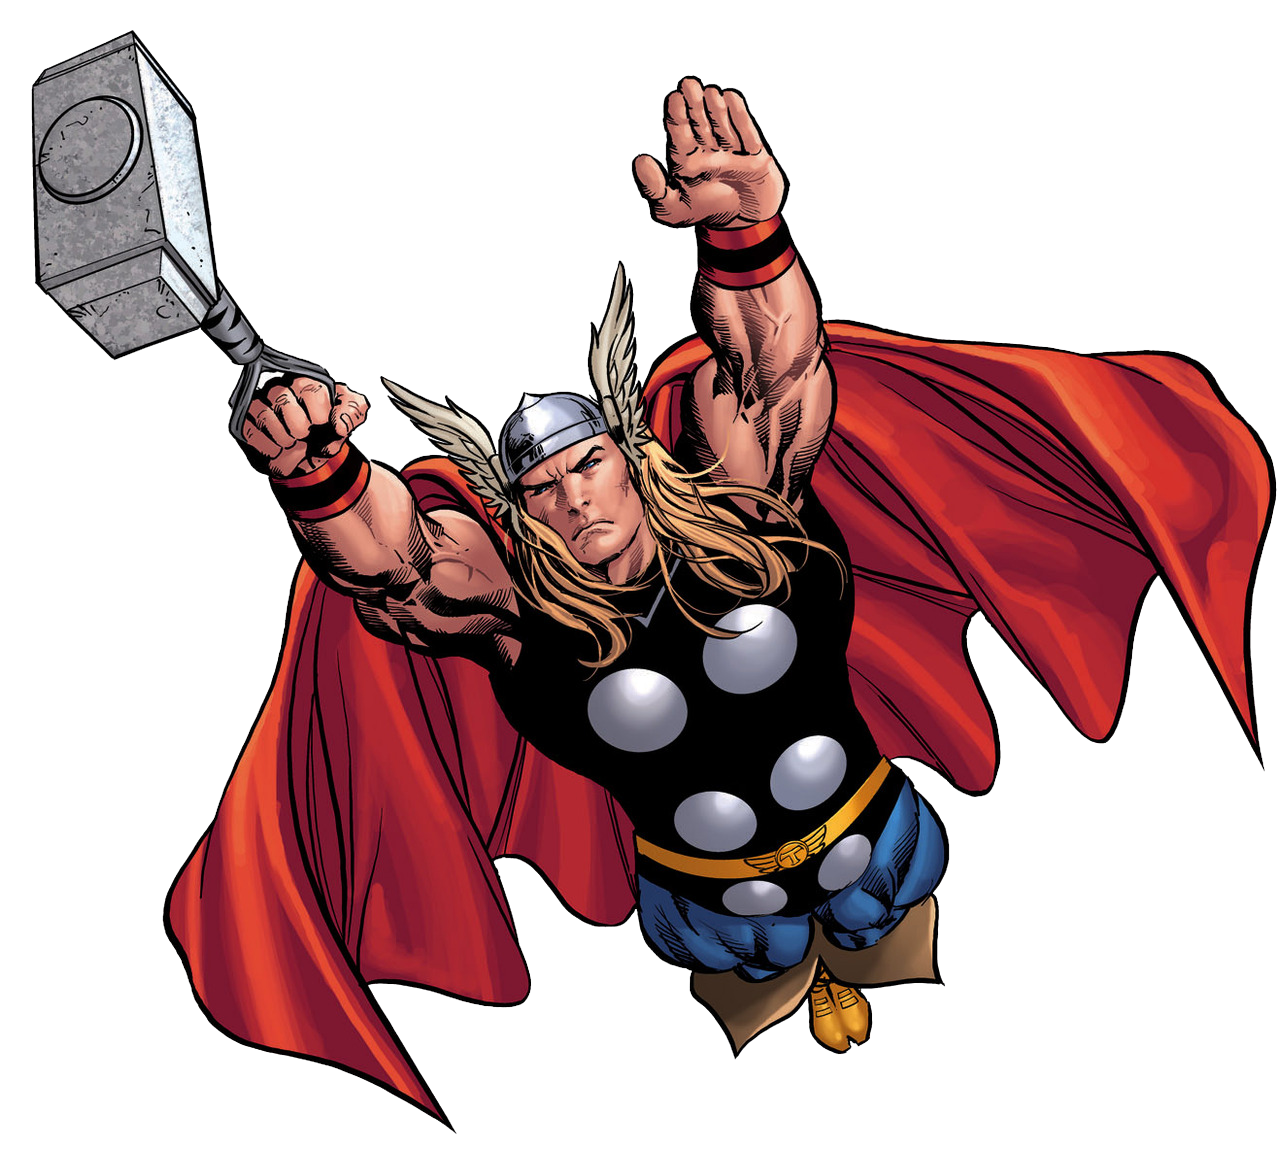 Download free photo images. Face clipart thor